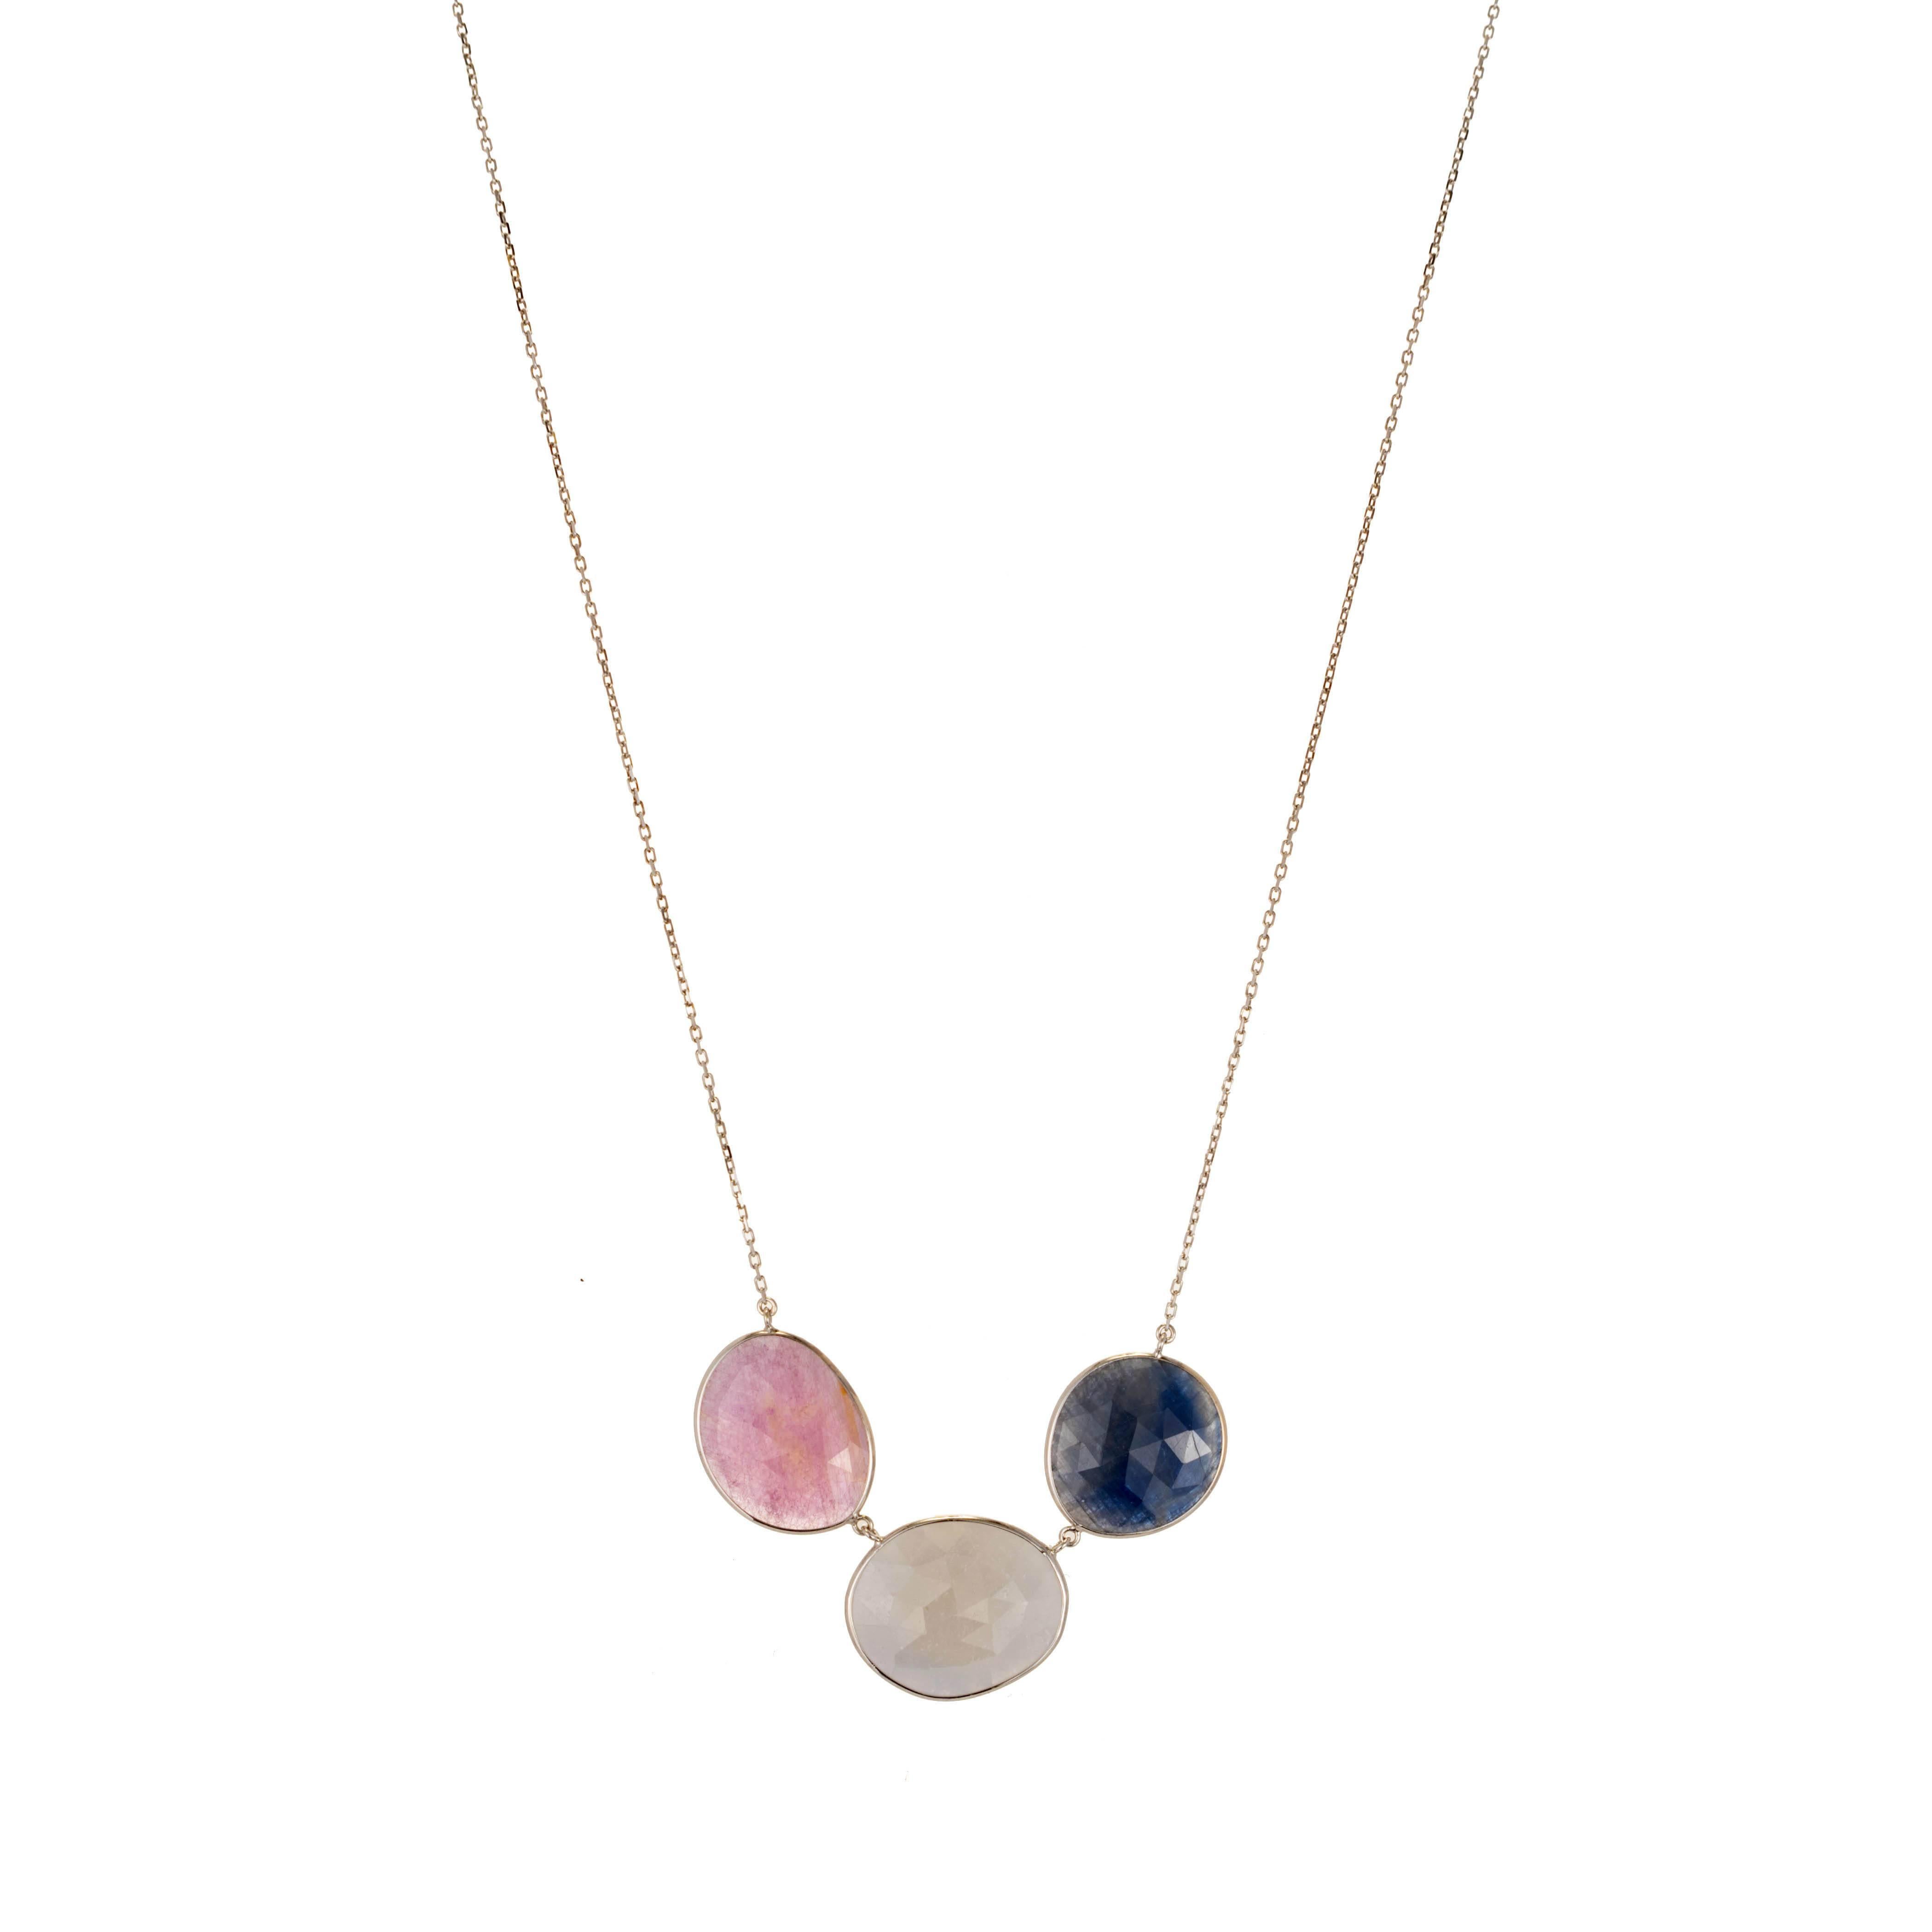 Pink, white and blue Sapphire slices, rose cut bezel set necklace. 14k white gold 18 inch cable chain. 

1 white Sapphire slice, approx. total weight 6.00cts, 20 x 15 x 3.5mm
1 blue Sapphire slice, approx. total weight 4.50cts, 20 x 15 x 3.5mm
1